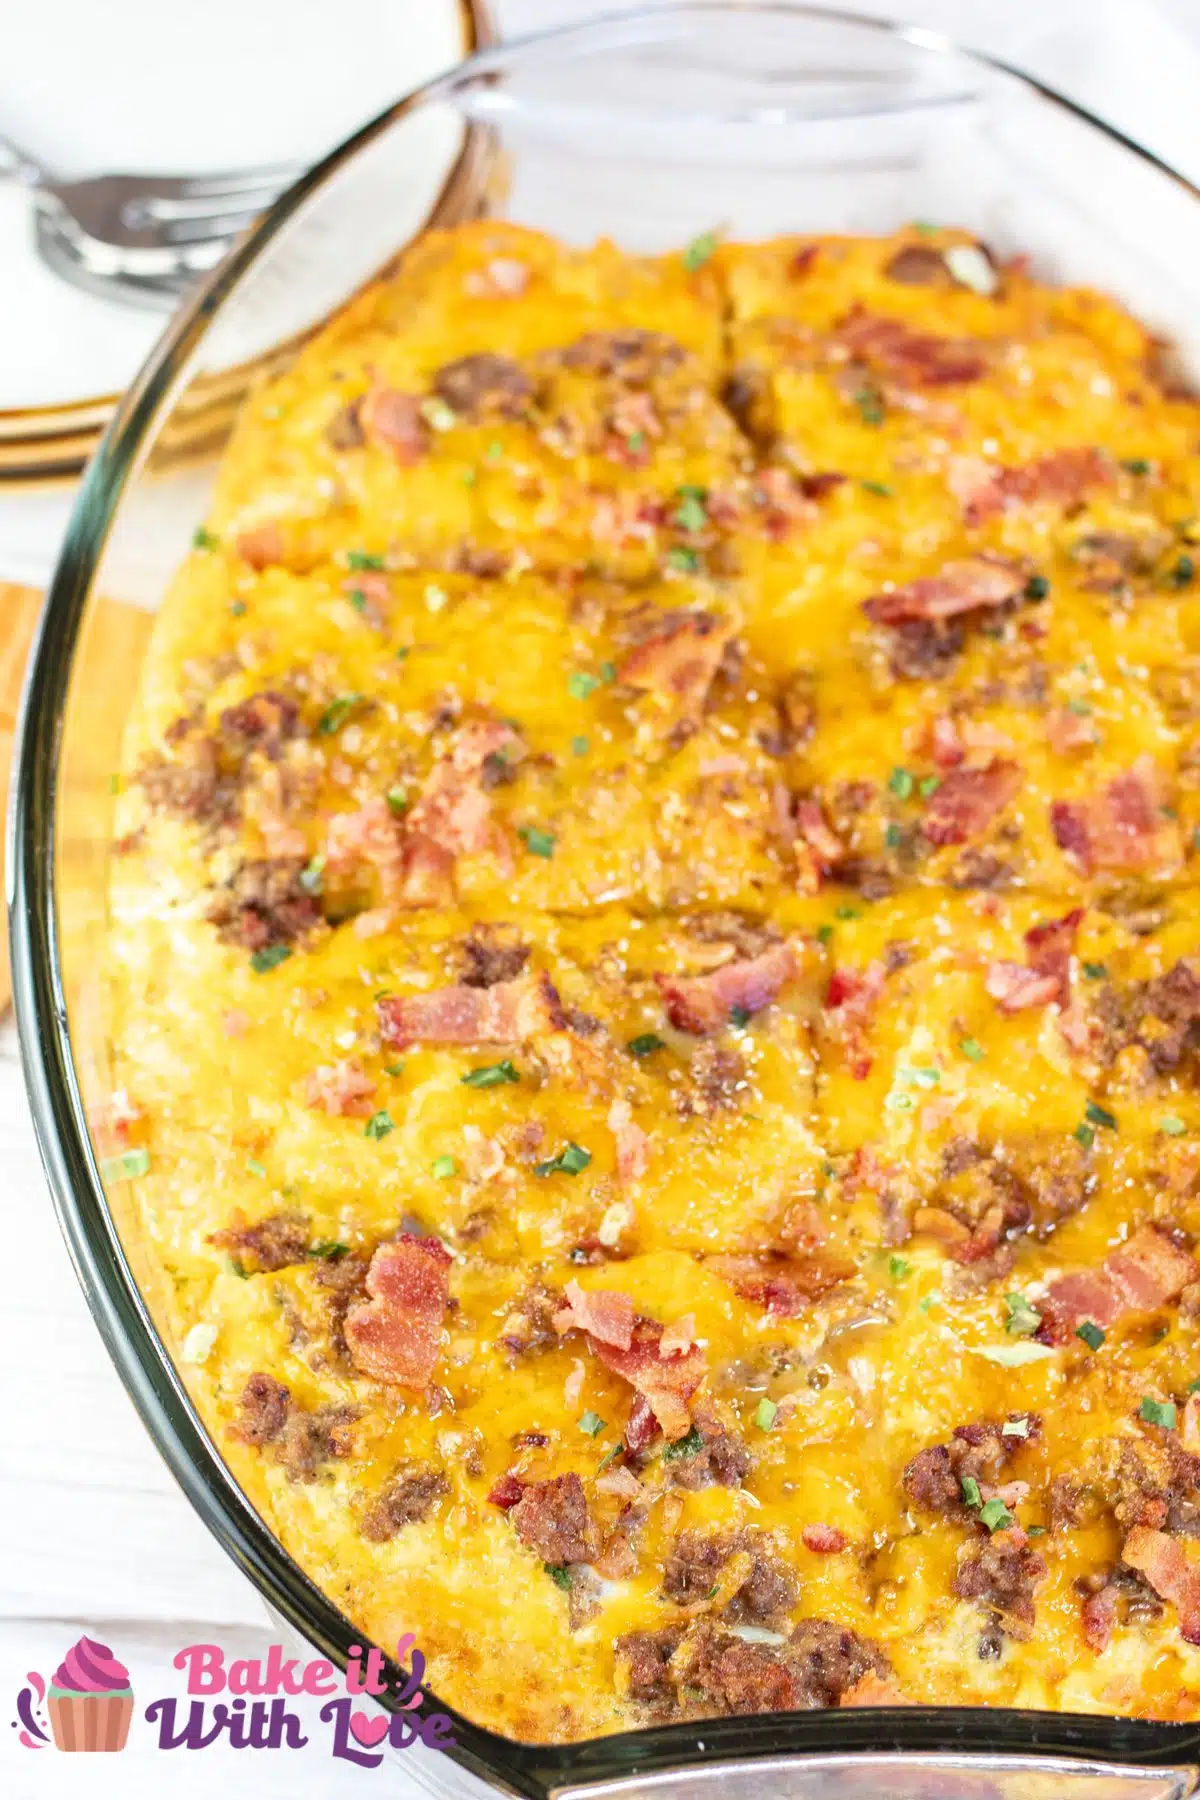 Tall image showing tater tot casserole.